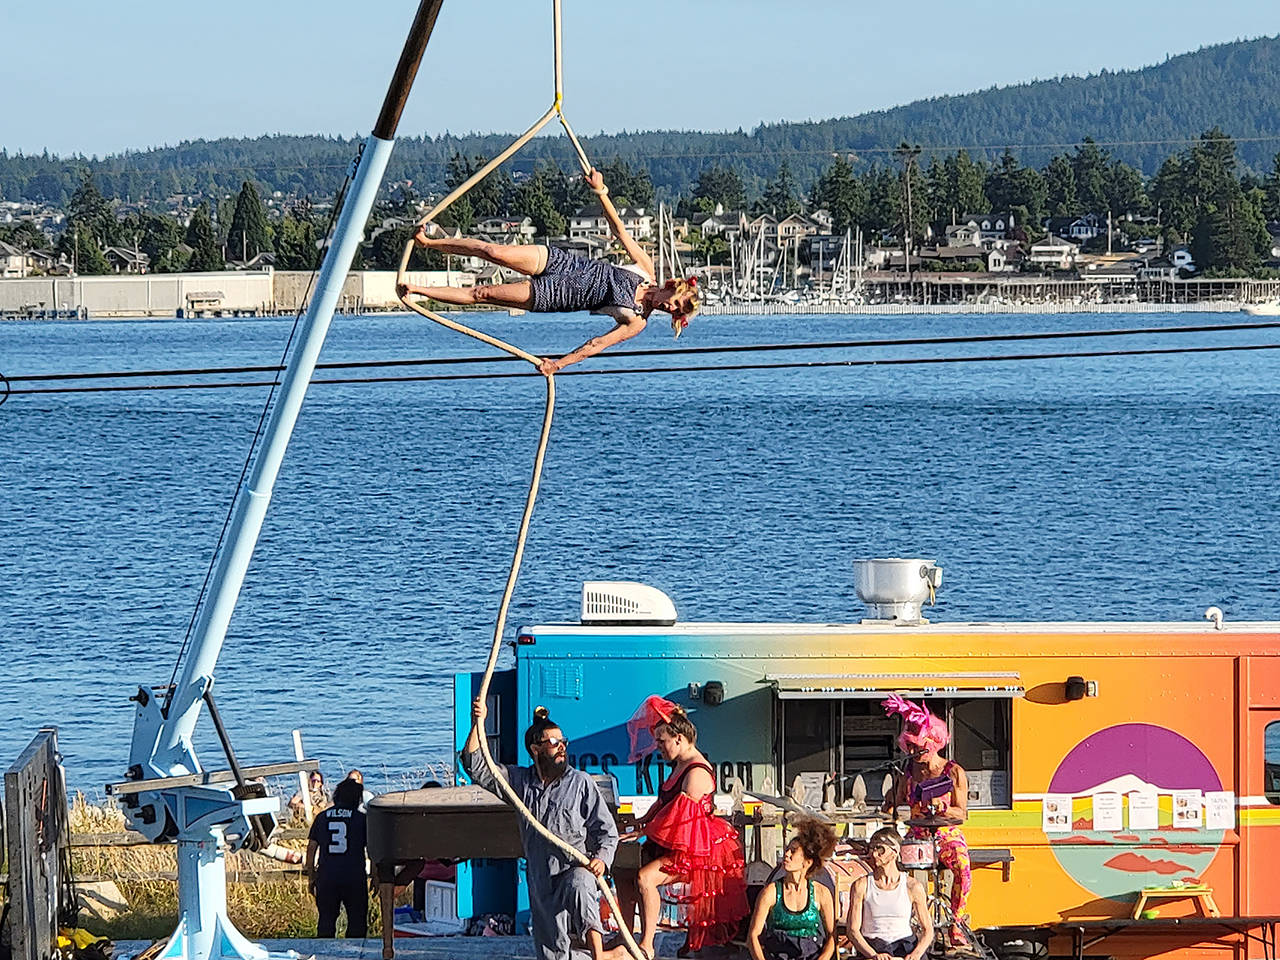 Up Up Up Inc., a traveling circus on a flatbed truck stage with a crane for aerial acts, performs Wednesday in Langley and Friday in Everett on its monthlong Pacific Northwest tour. It’s seen here at a show on Guemes Island north of Anacortes. (Submitted photo)